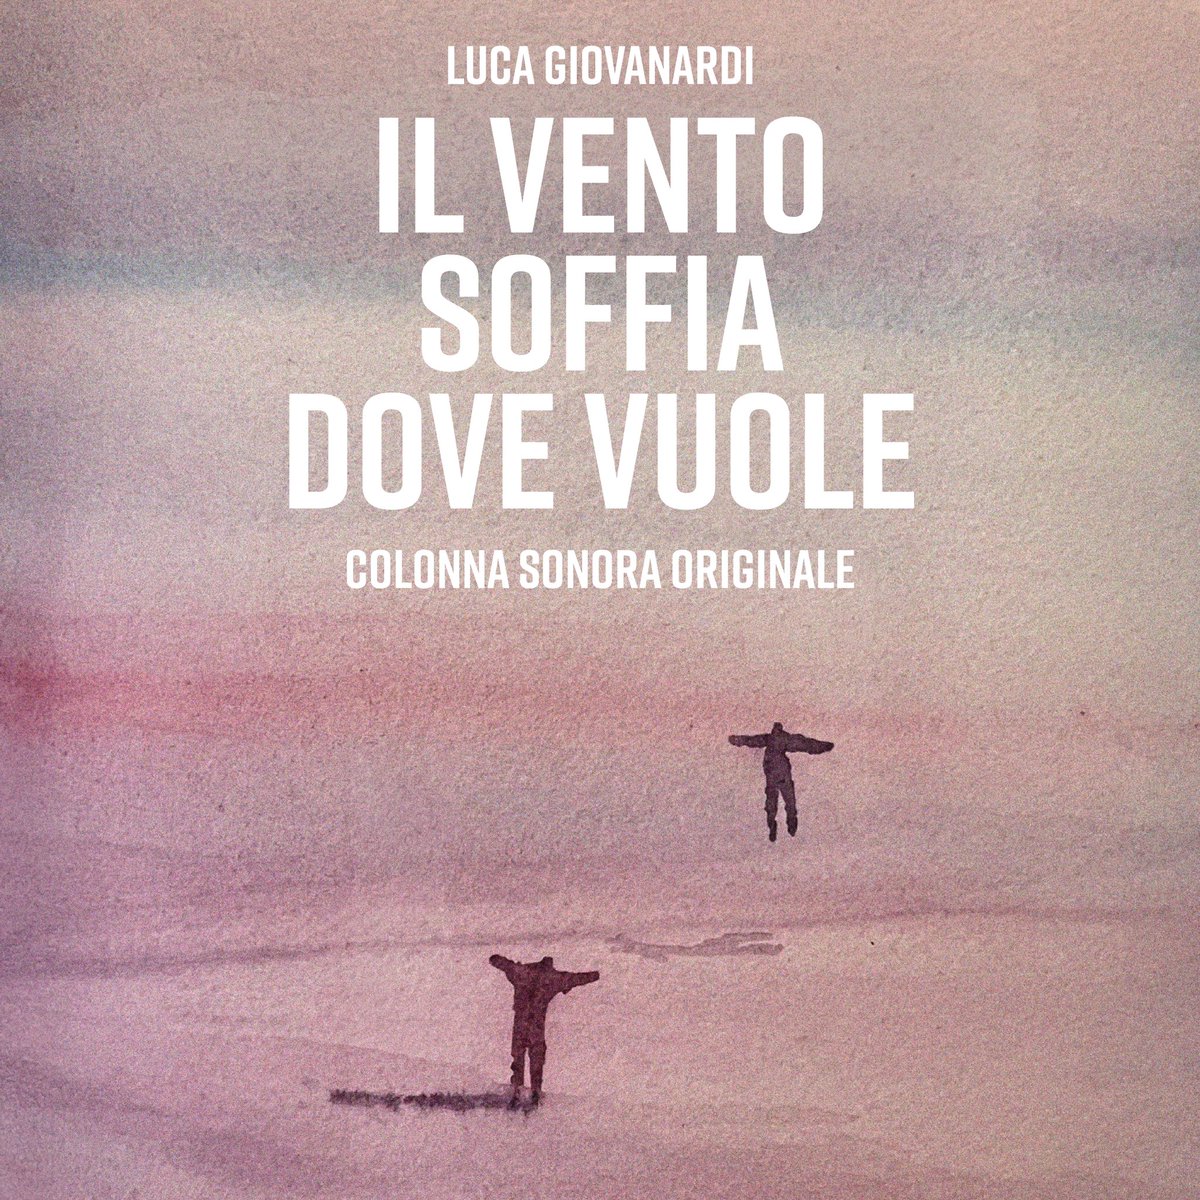 IL VENTO SOFFIA DOVE VUOLE (Where The Wind Blows) A film by Marco Righi Music by Luca Giovanardi from Feb 29th on all platforms. 💸 -> PRE-ORDER DIGITAL: bit.ly/IVSDVOST 🎧 -> PRE-SAVE/STREAM: orcd.co/lucagiovanardi…